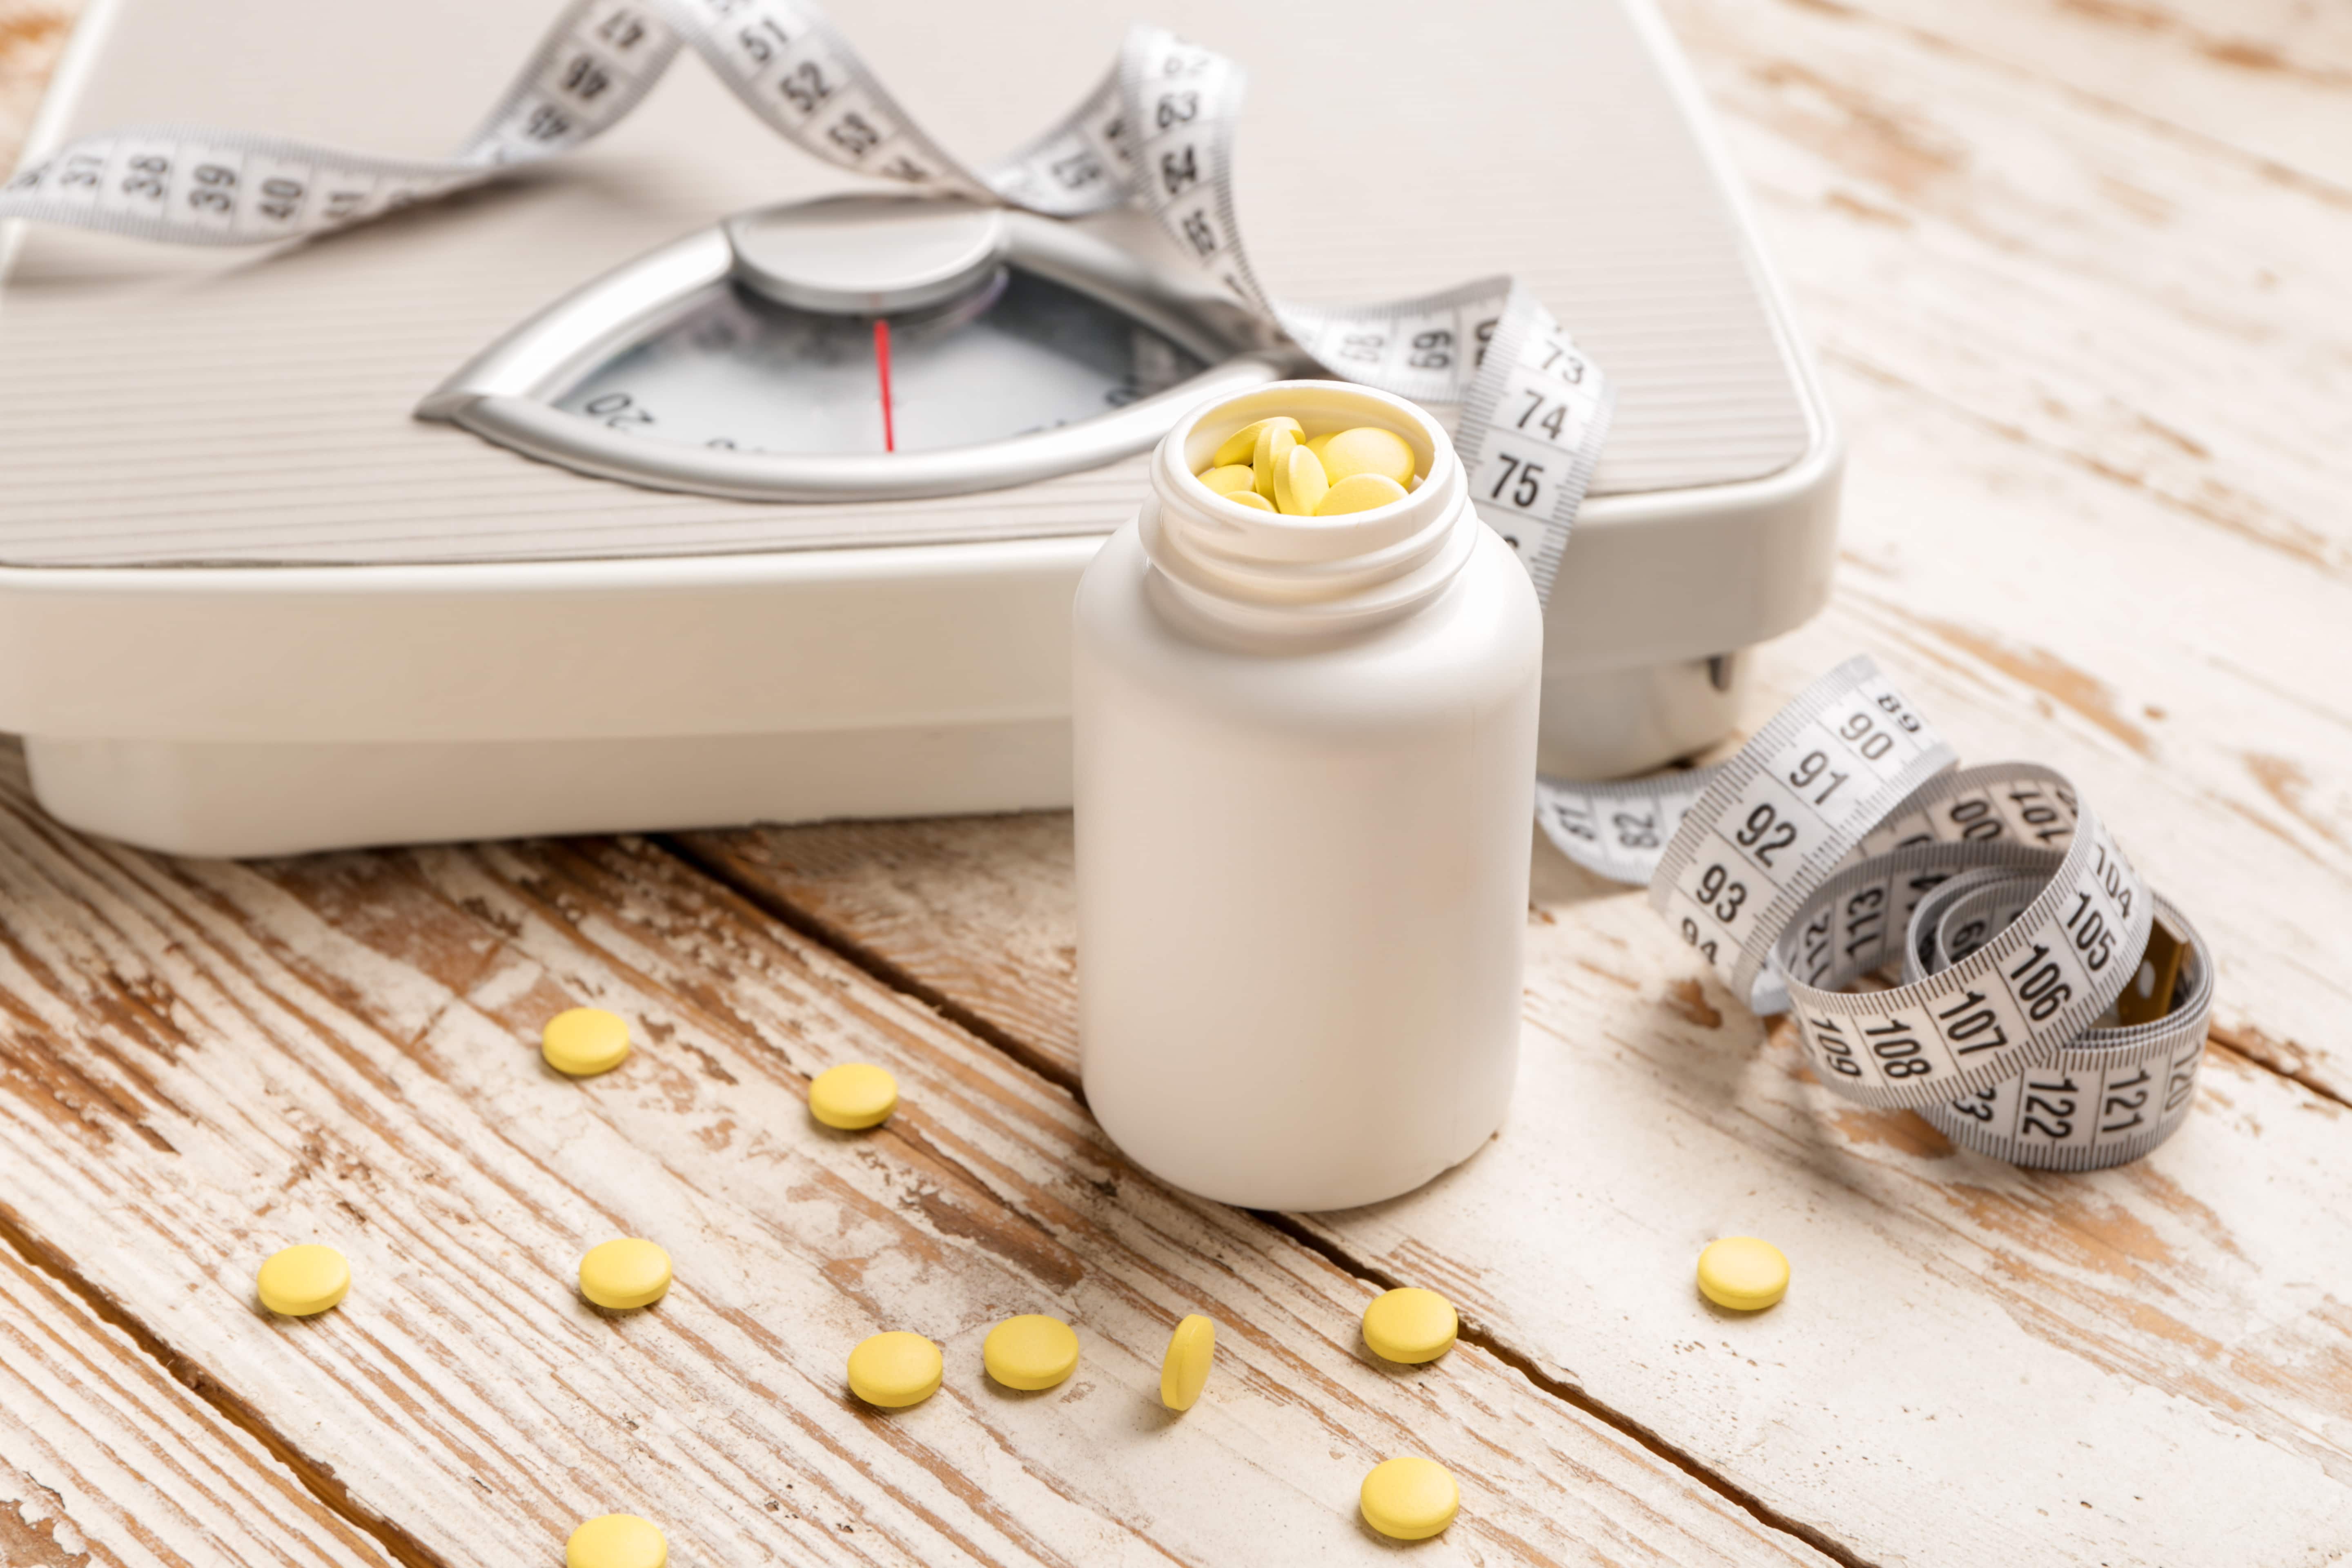 Scale with measuring tape and pills. Anti-obesity medications can help physicians create obesity treatment options.